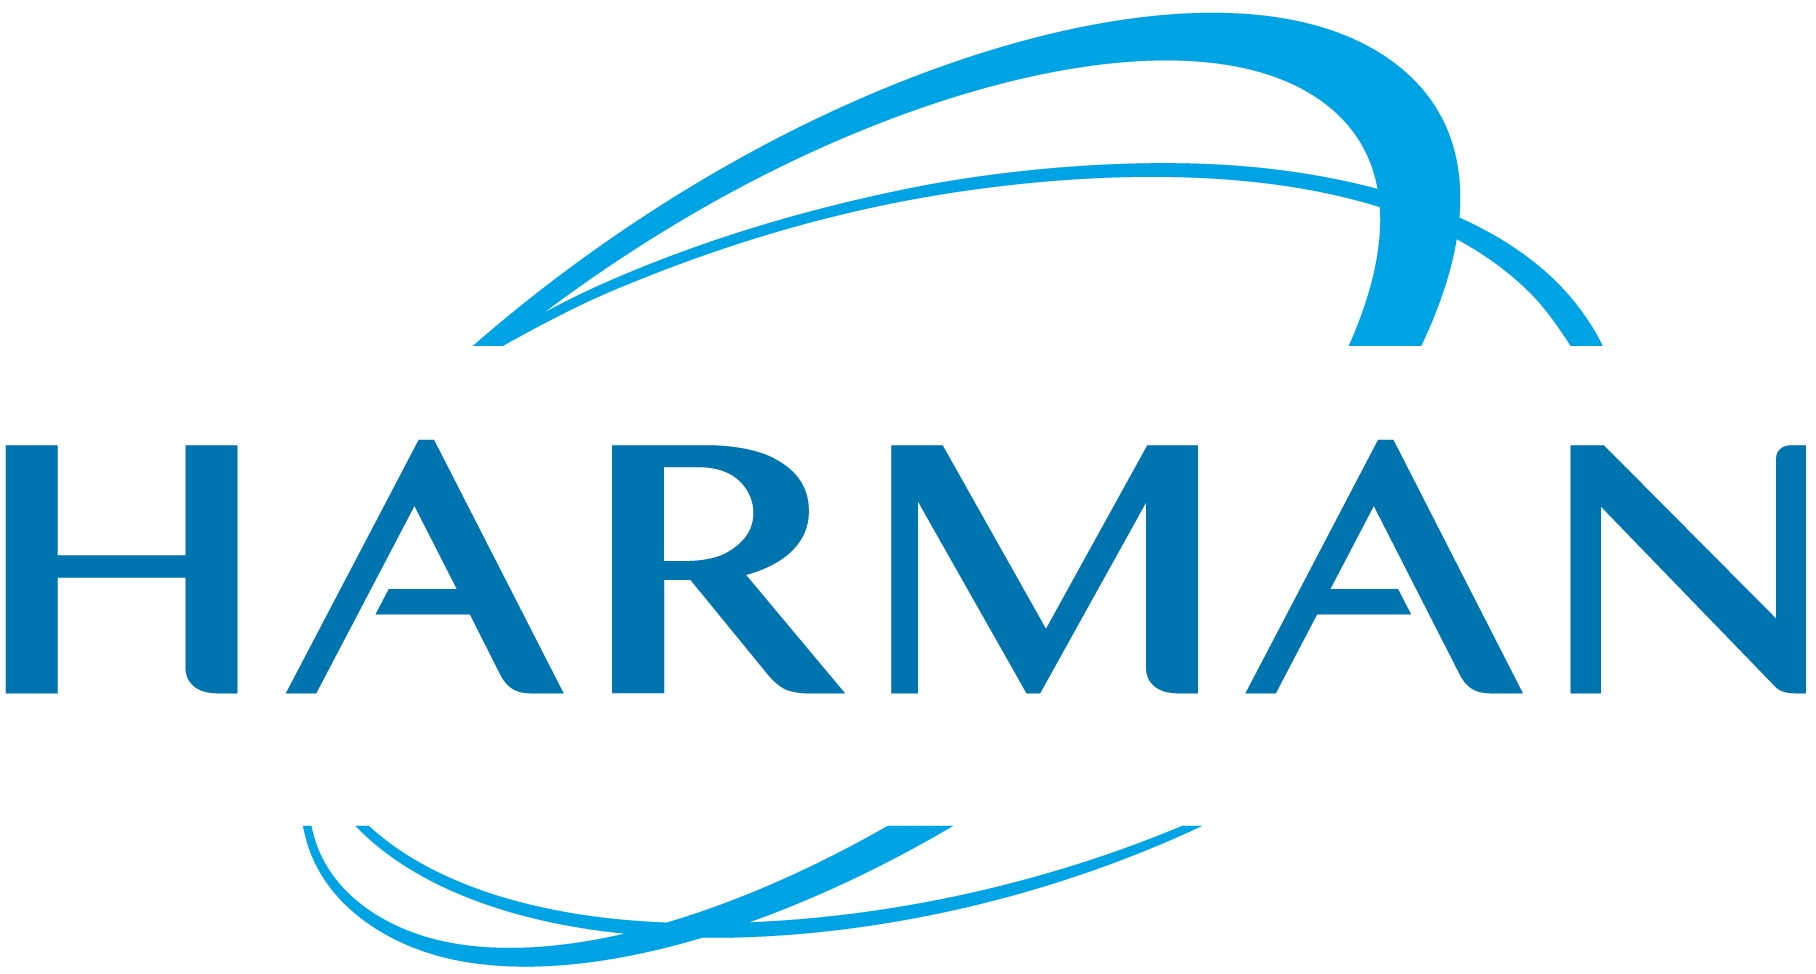 2023 Success and 2024 Innovations: HARMAN's Digital Transformation Solutions Reshaping Supply Chains, Quantum Computing, and Analytics